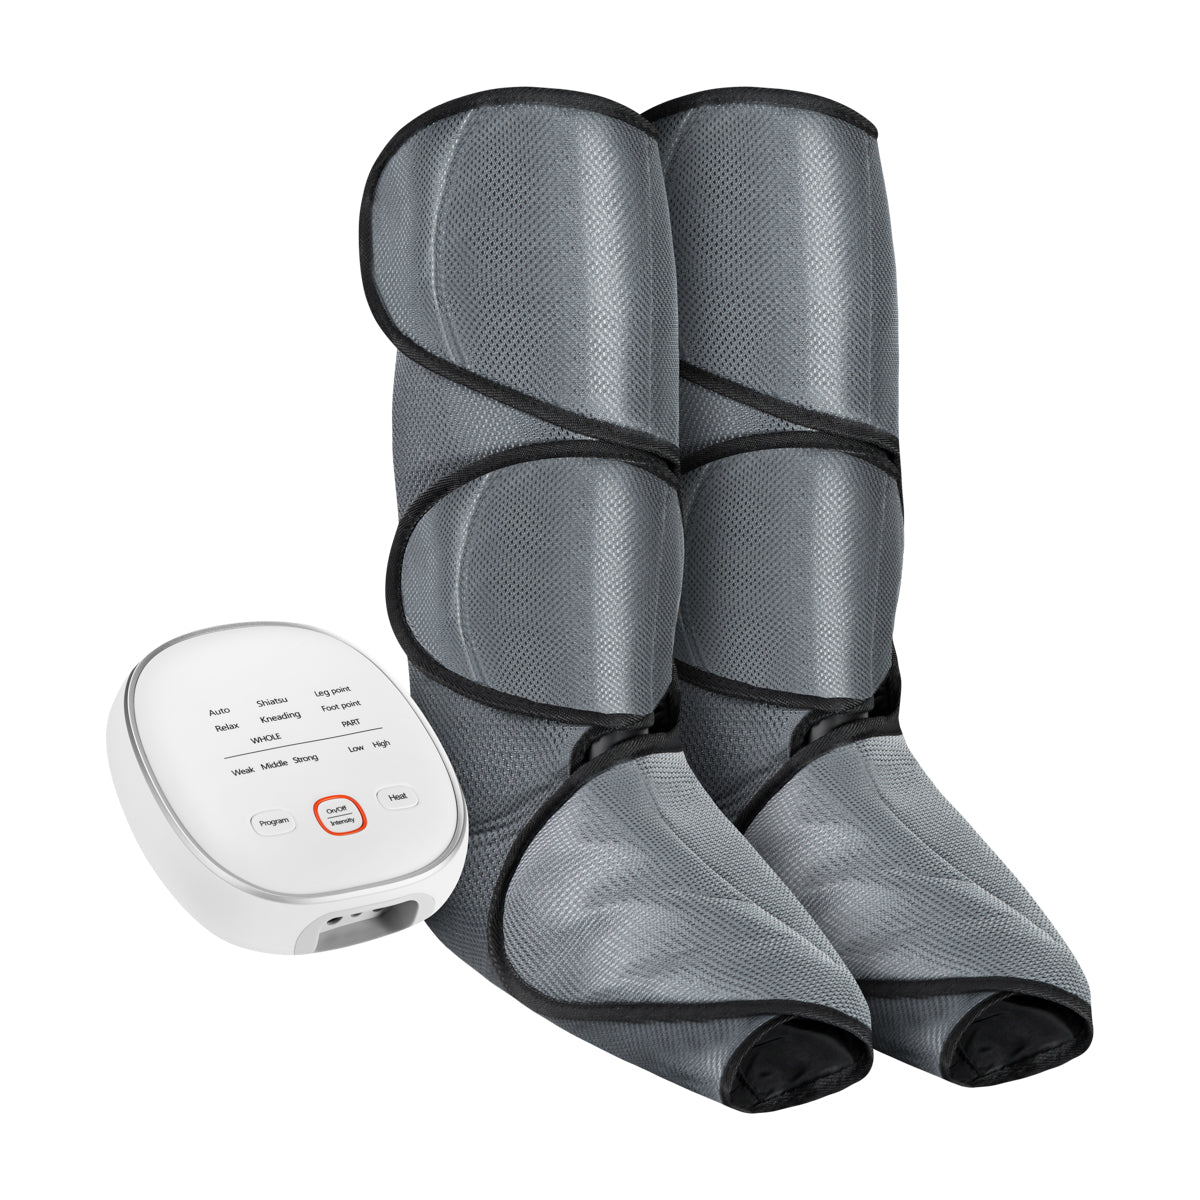 Mirusens device for leg pressotherapy - lymphatic drainage